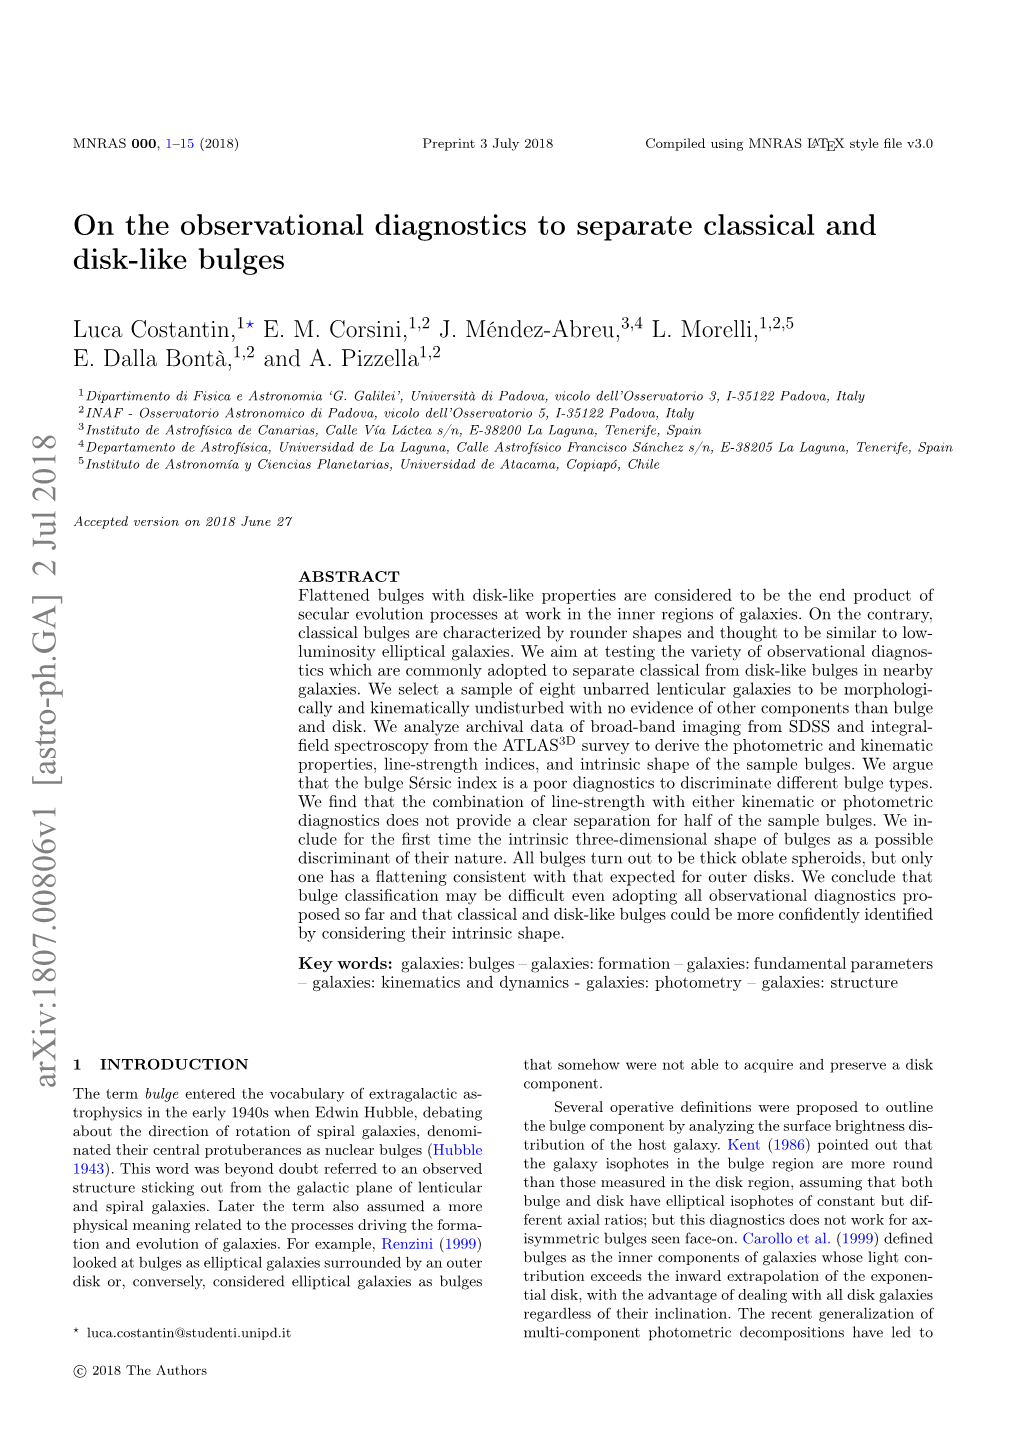 On the Observational Diagnostics to Separate Classical and Disk-Like Bulges